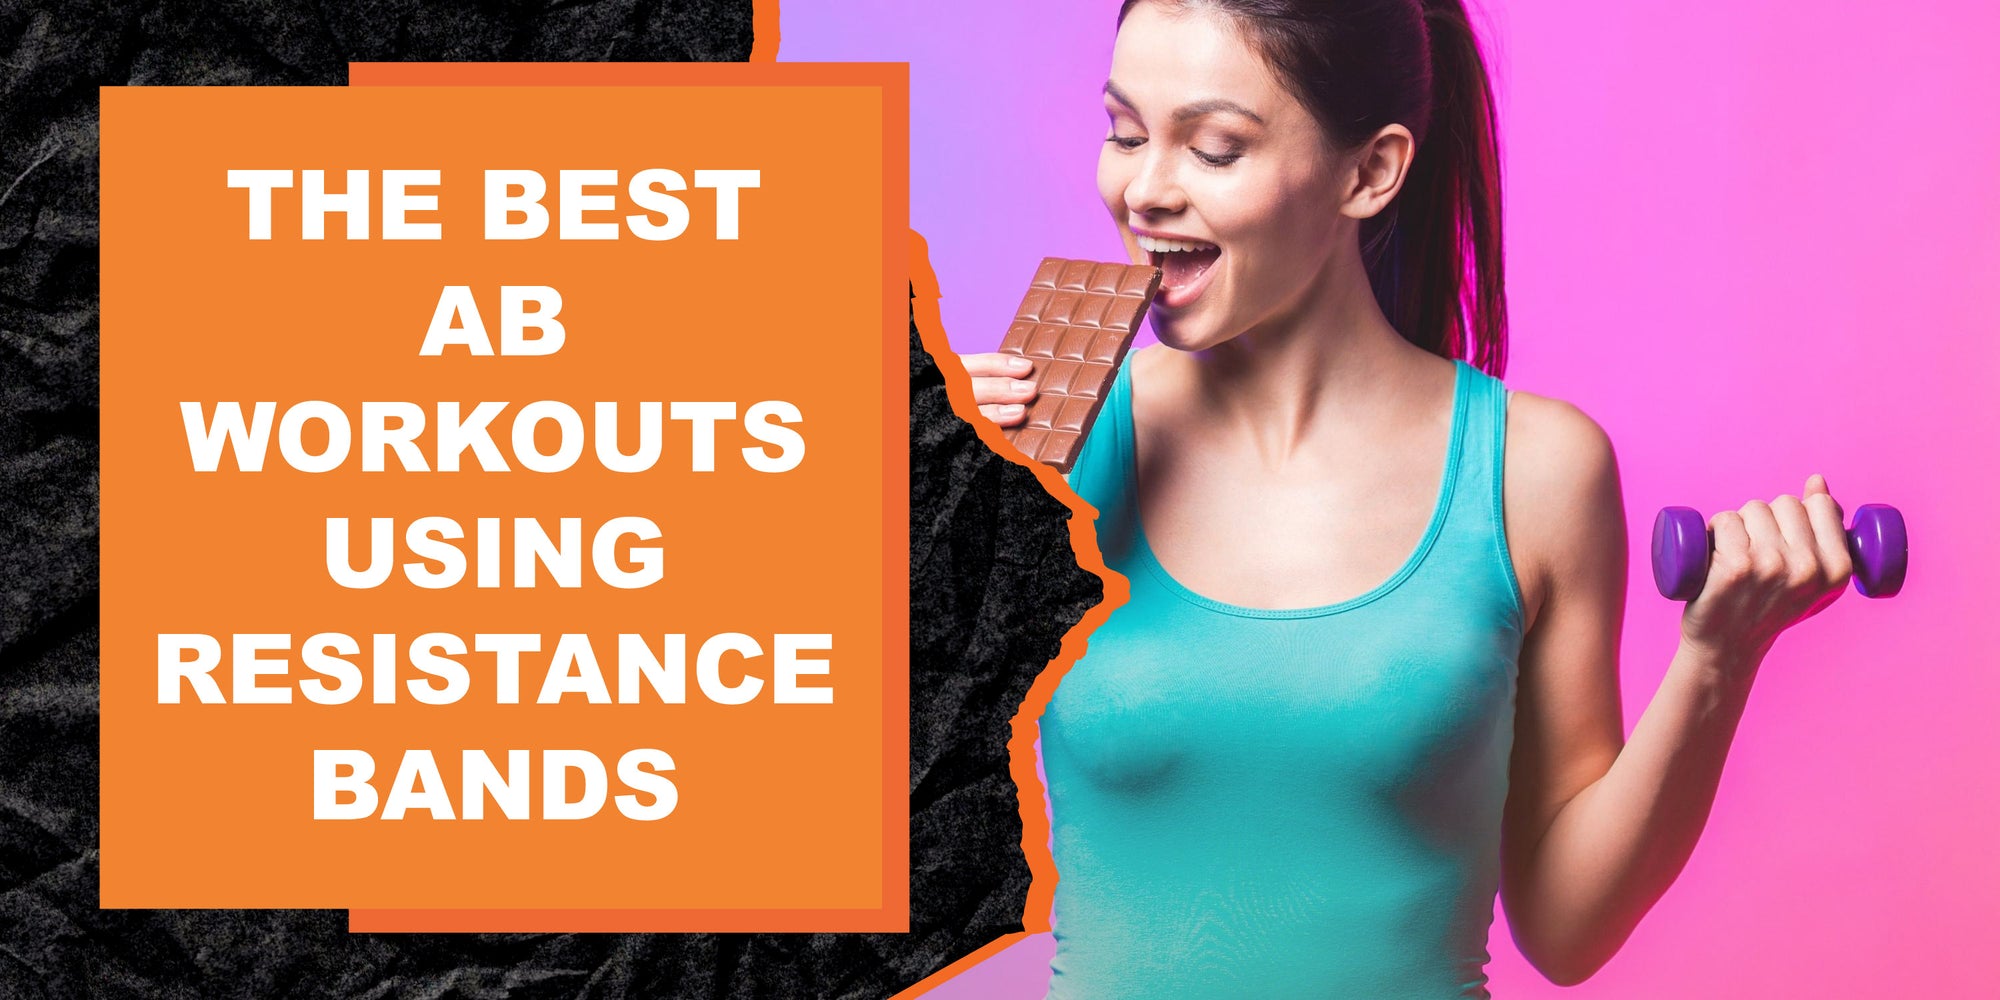 The Best Ab Workouts Using Resistance Bands